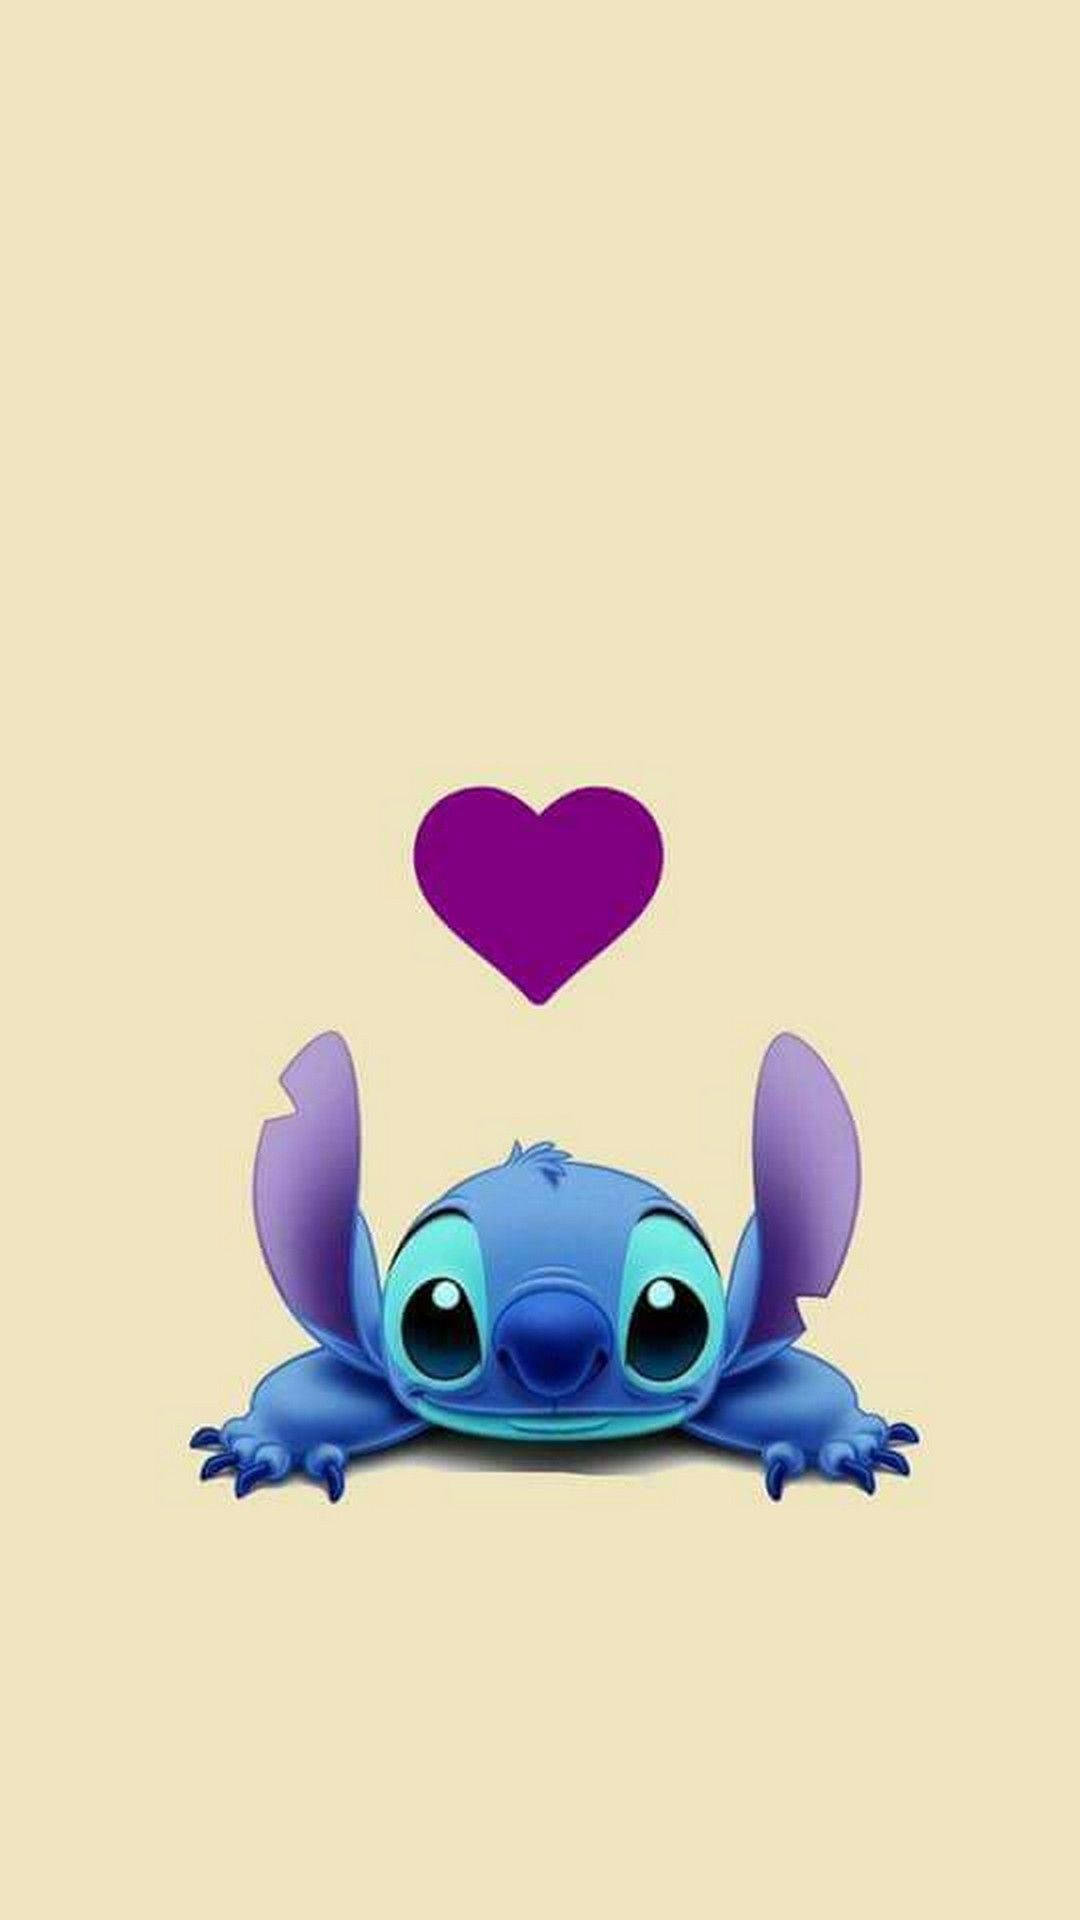 Cute Aesthetic Stitch With Purple Heart Wallpaper